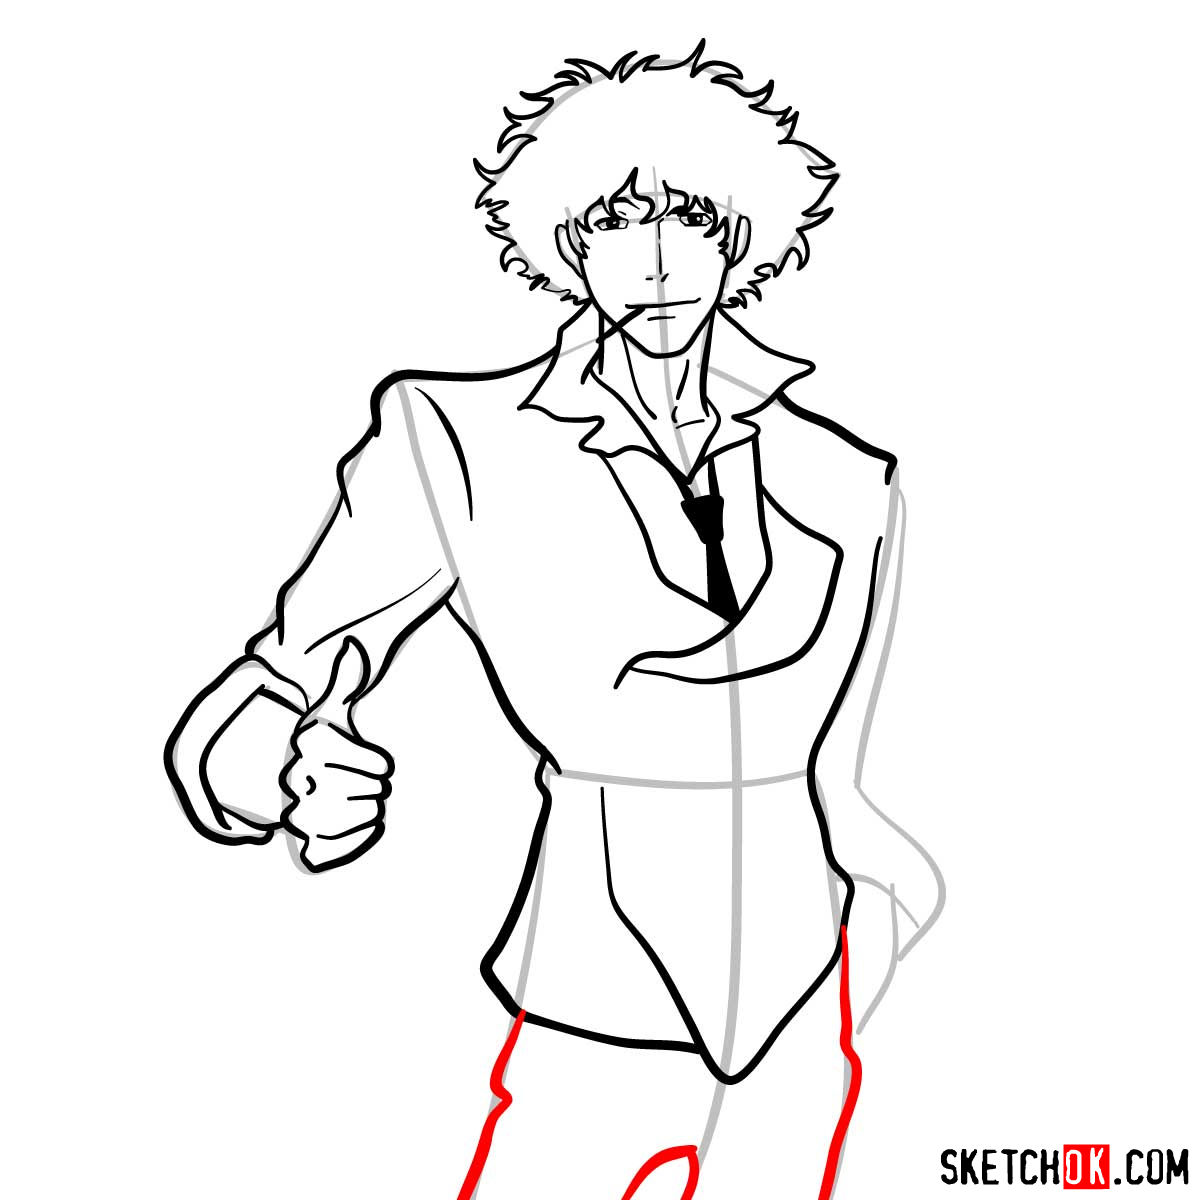 How to draw Spike Spiegel from Cowboy Bebop anime - step 10